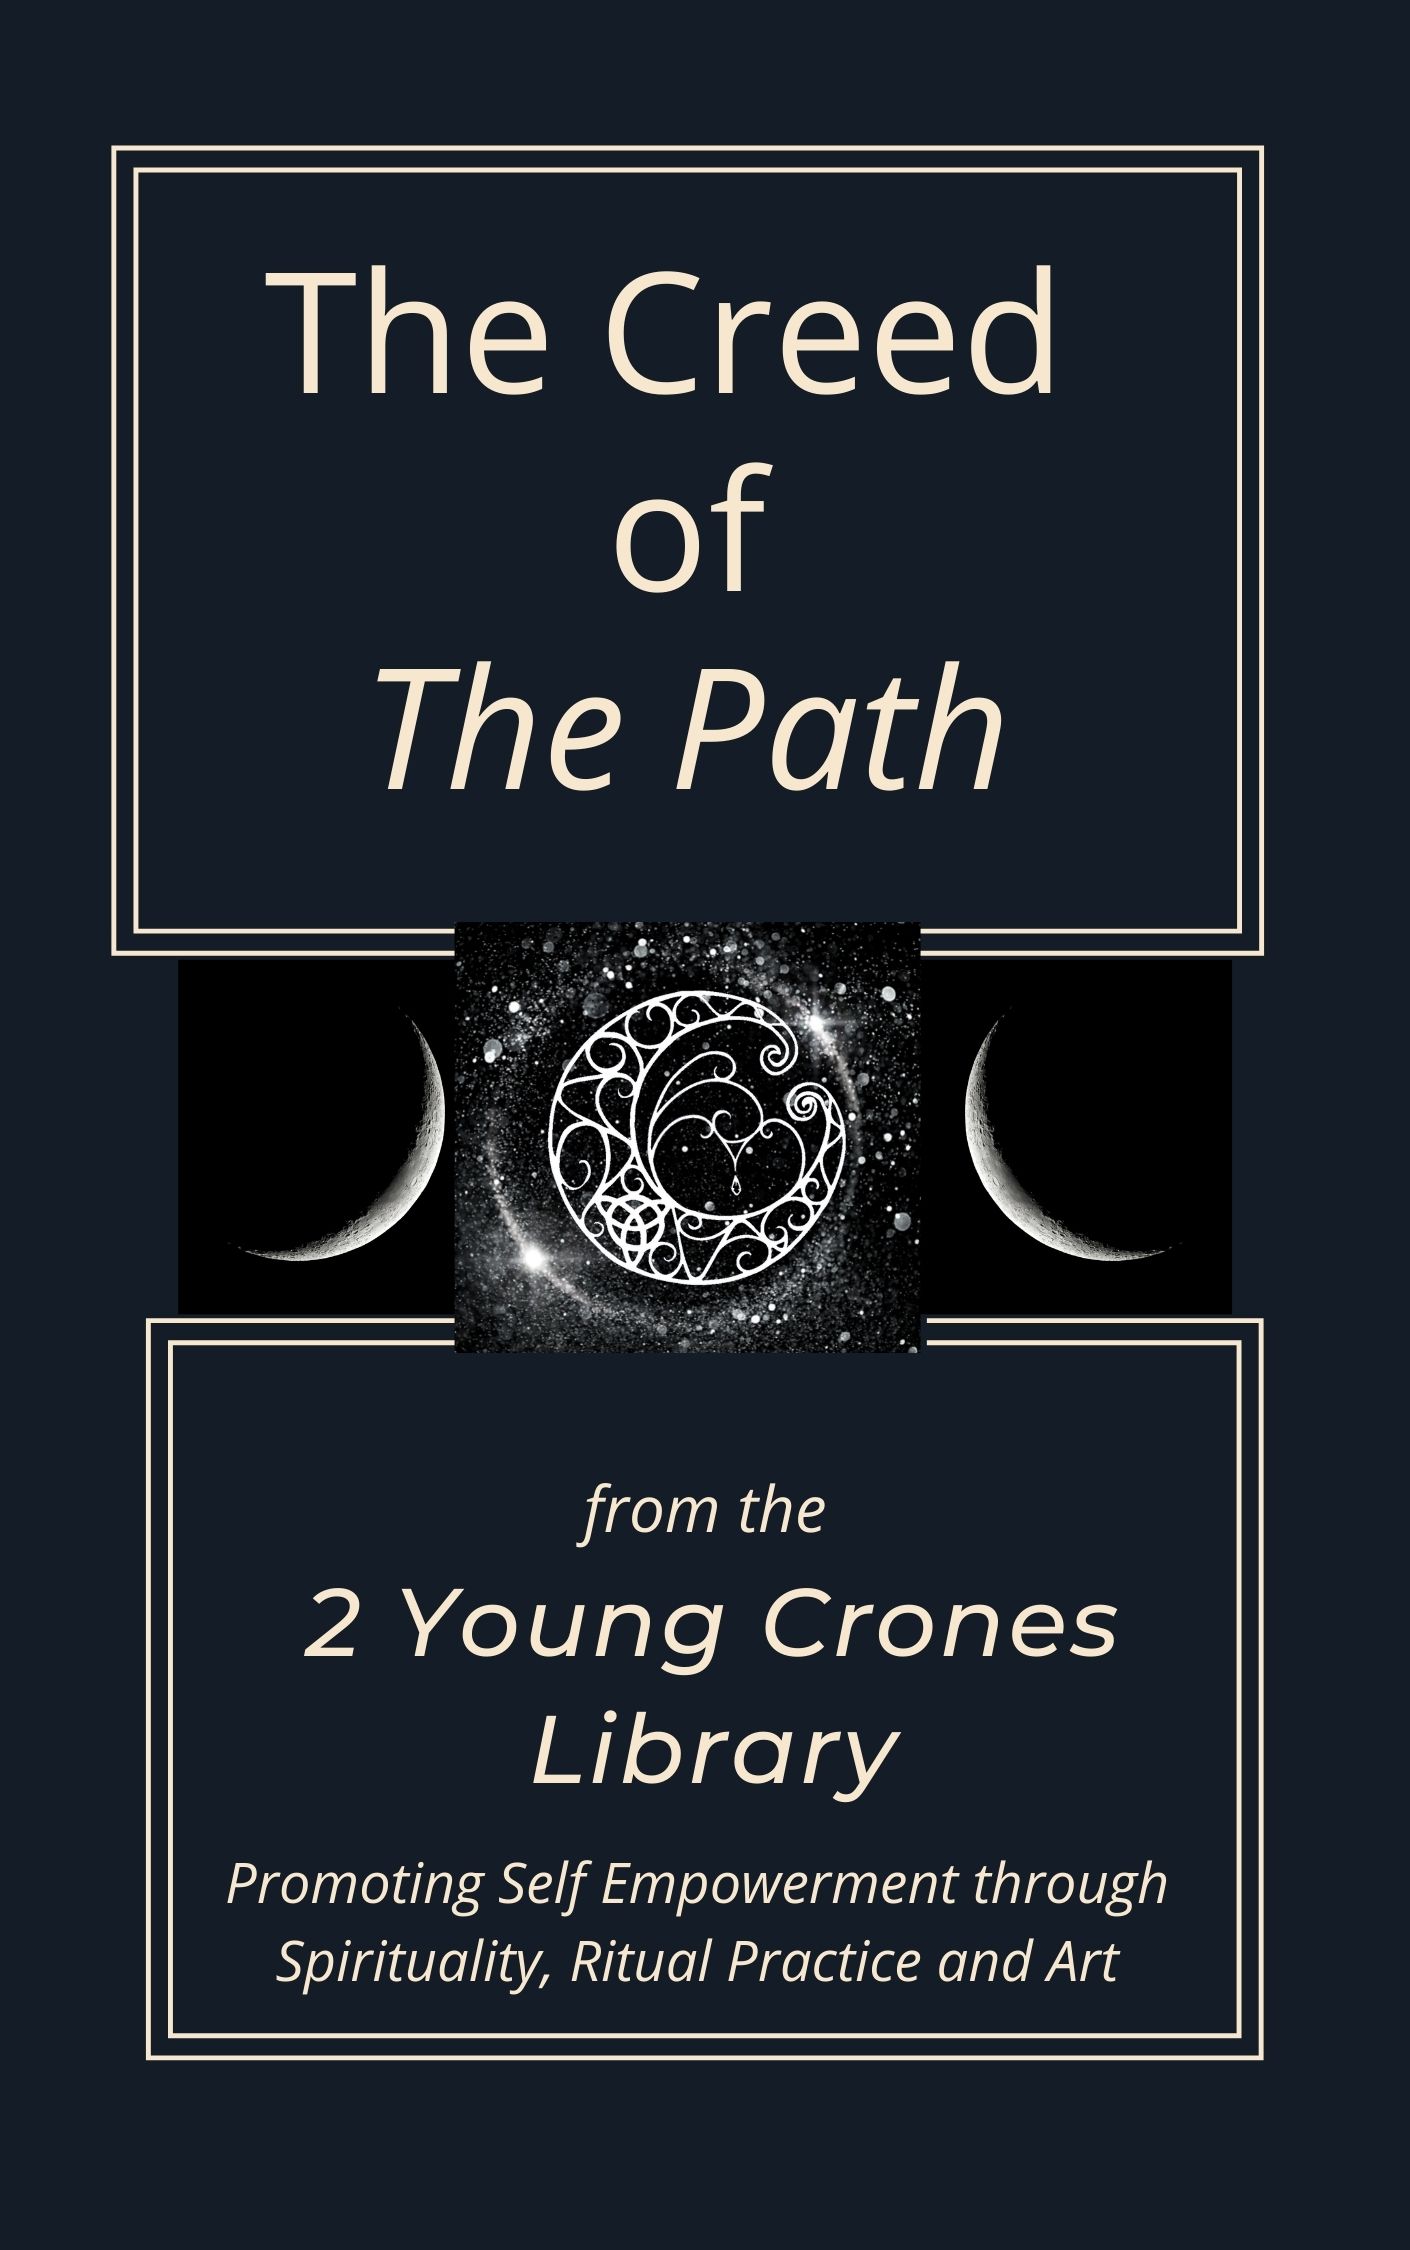 The Creed of the Path